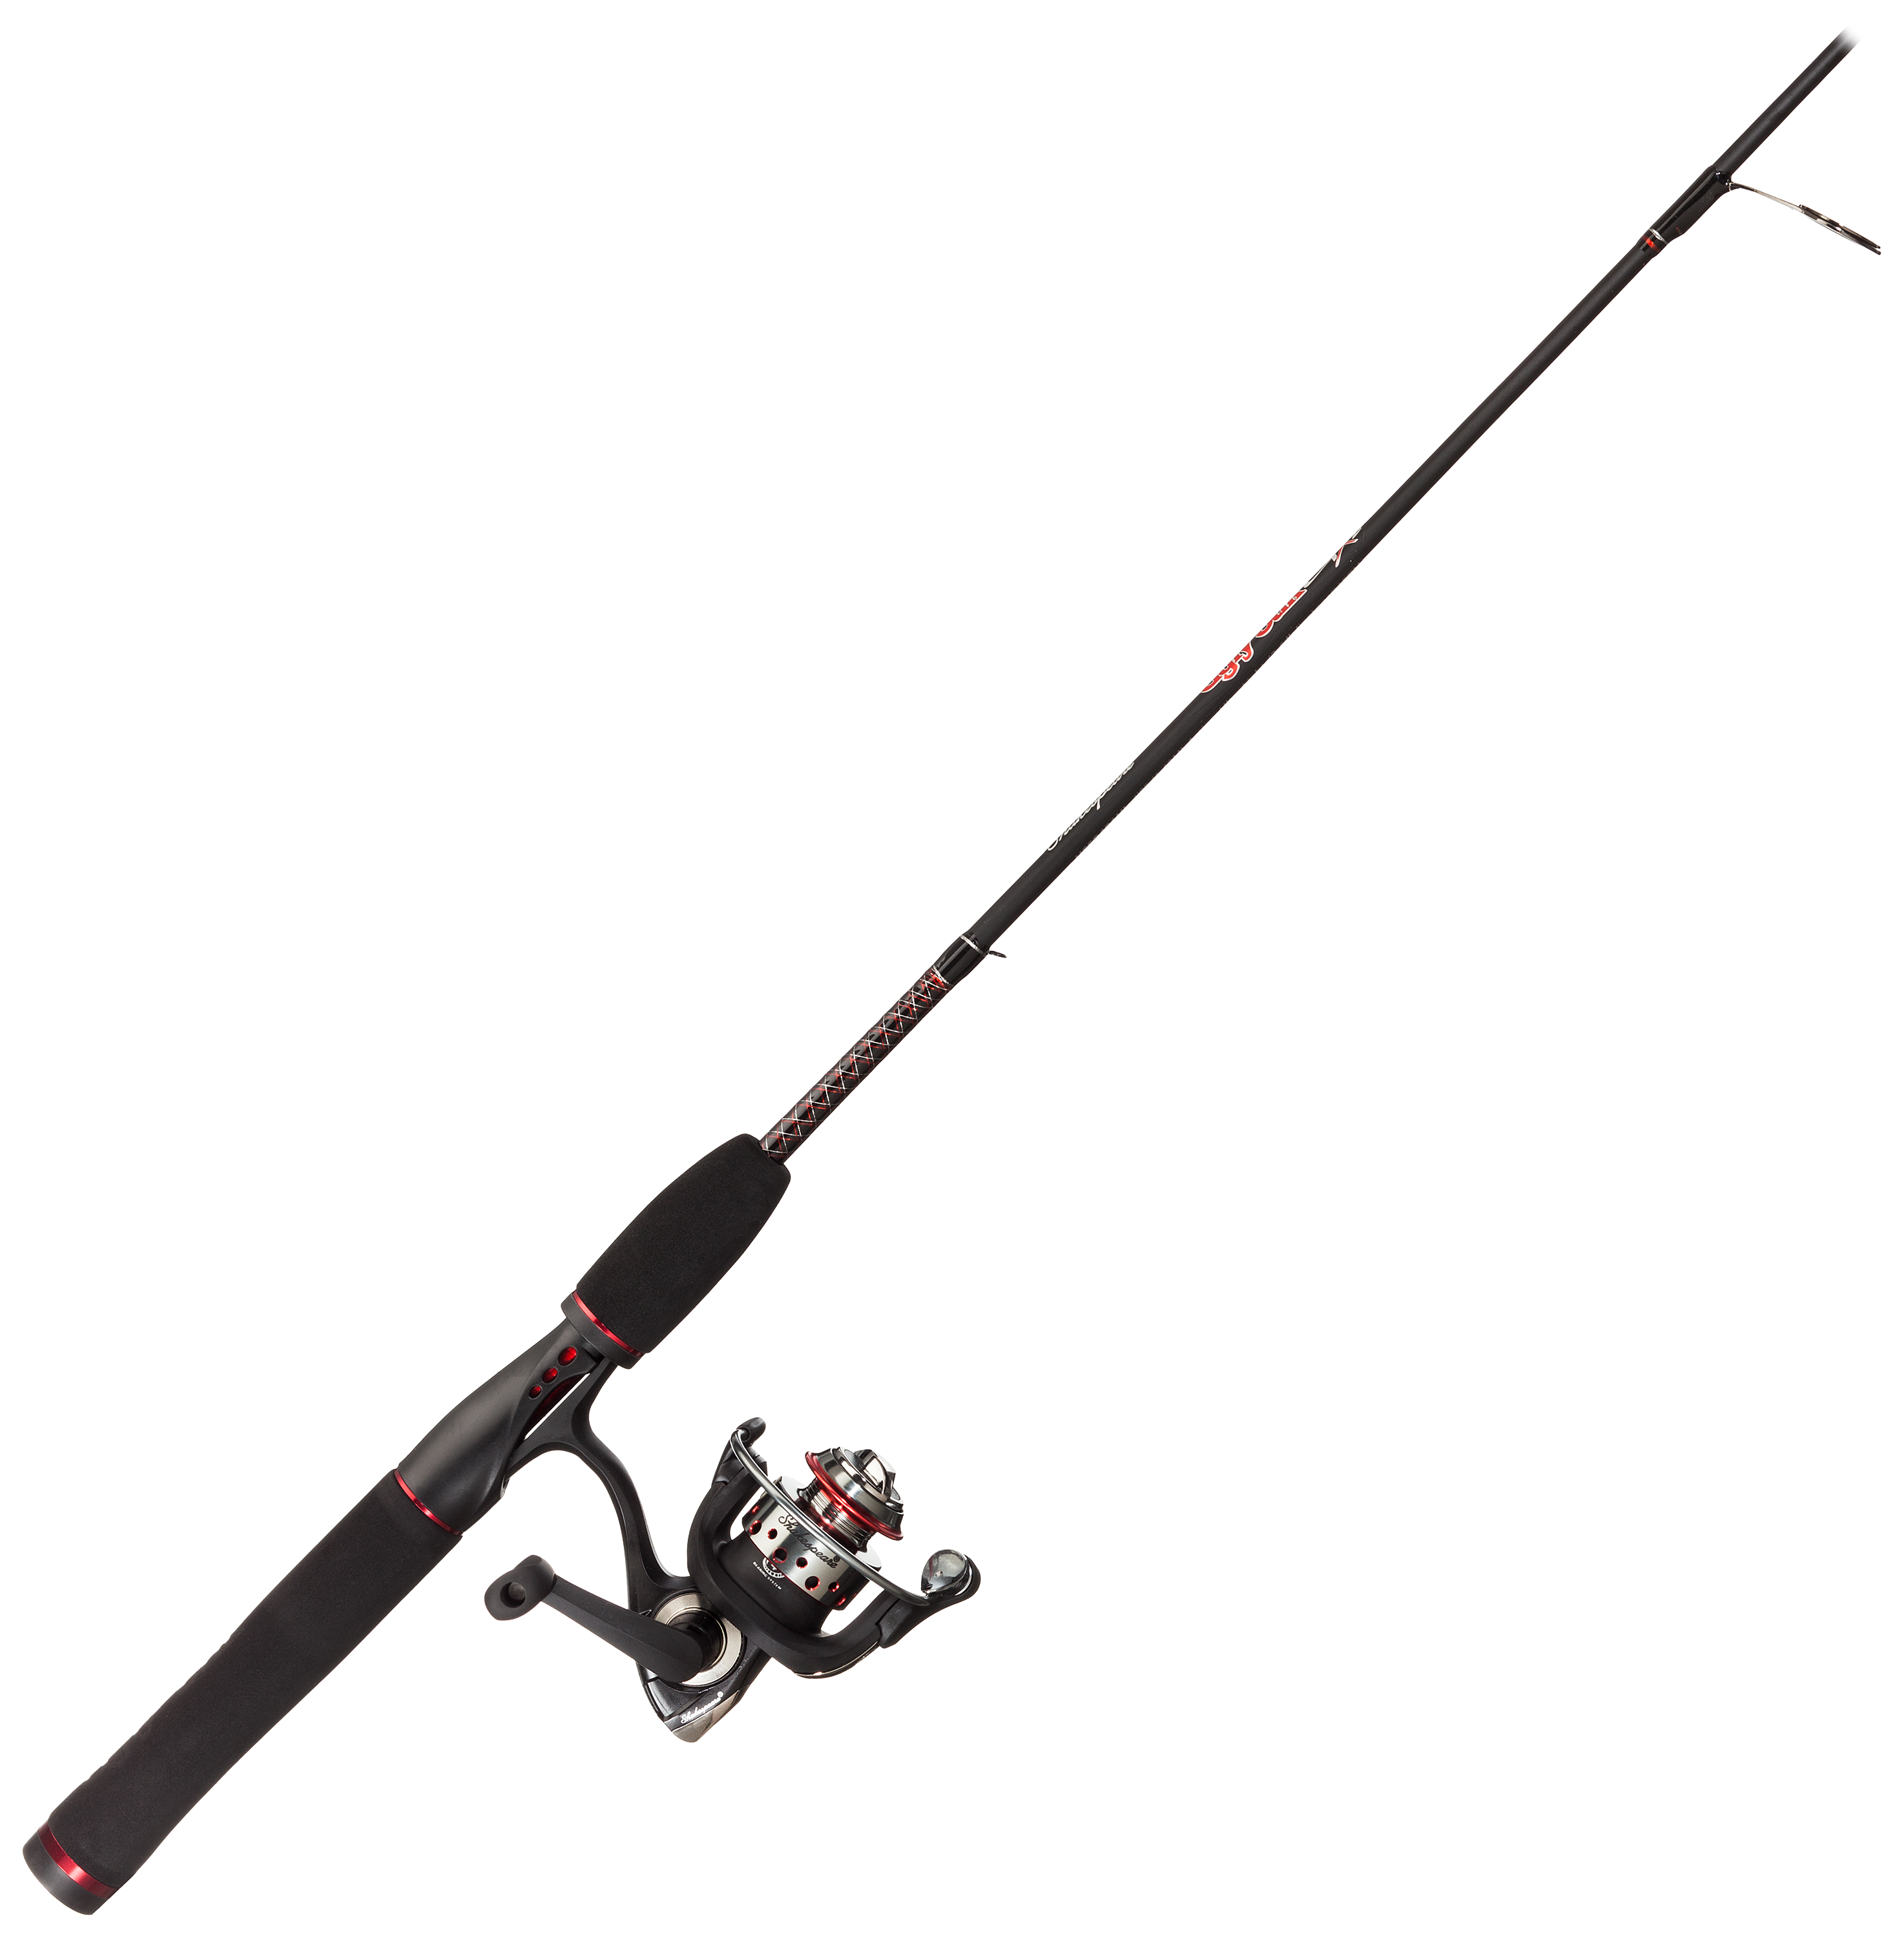 Basspro Micro-Lite Spinning Pack Rod. Graphite 5' 6 Light Action -  Backpacking Light